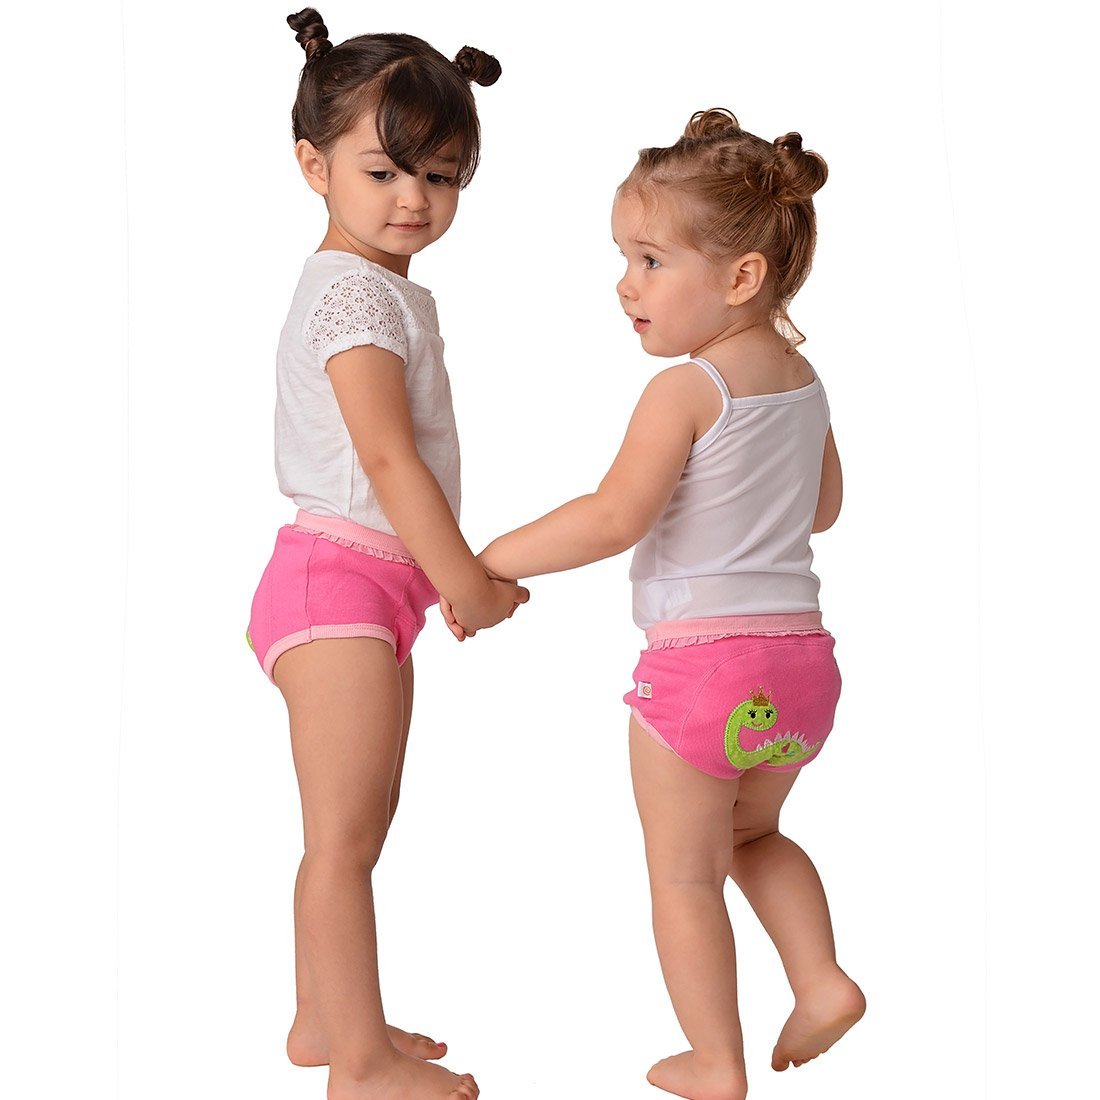 Minnie Mouse 3-Pair Training Pants Girls Underwear Set Toddler Girl Size 2T  NEW